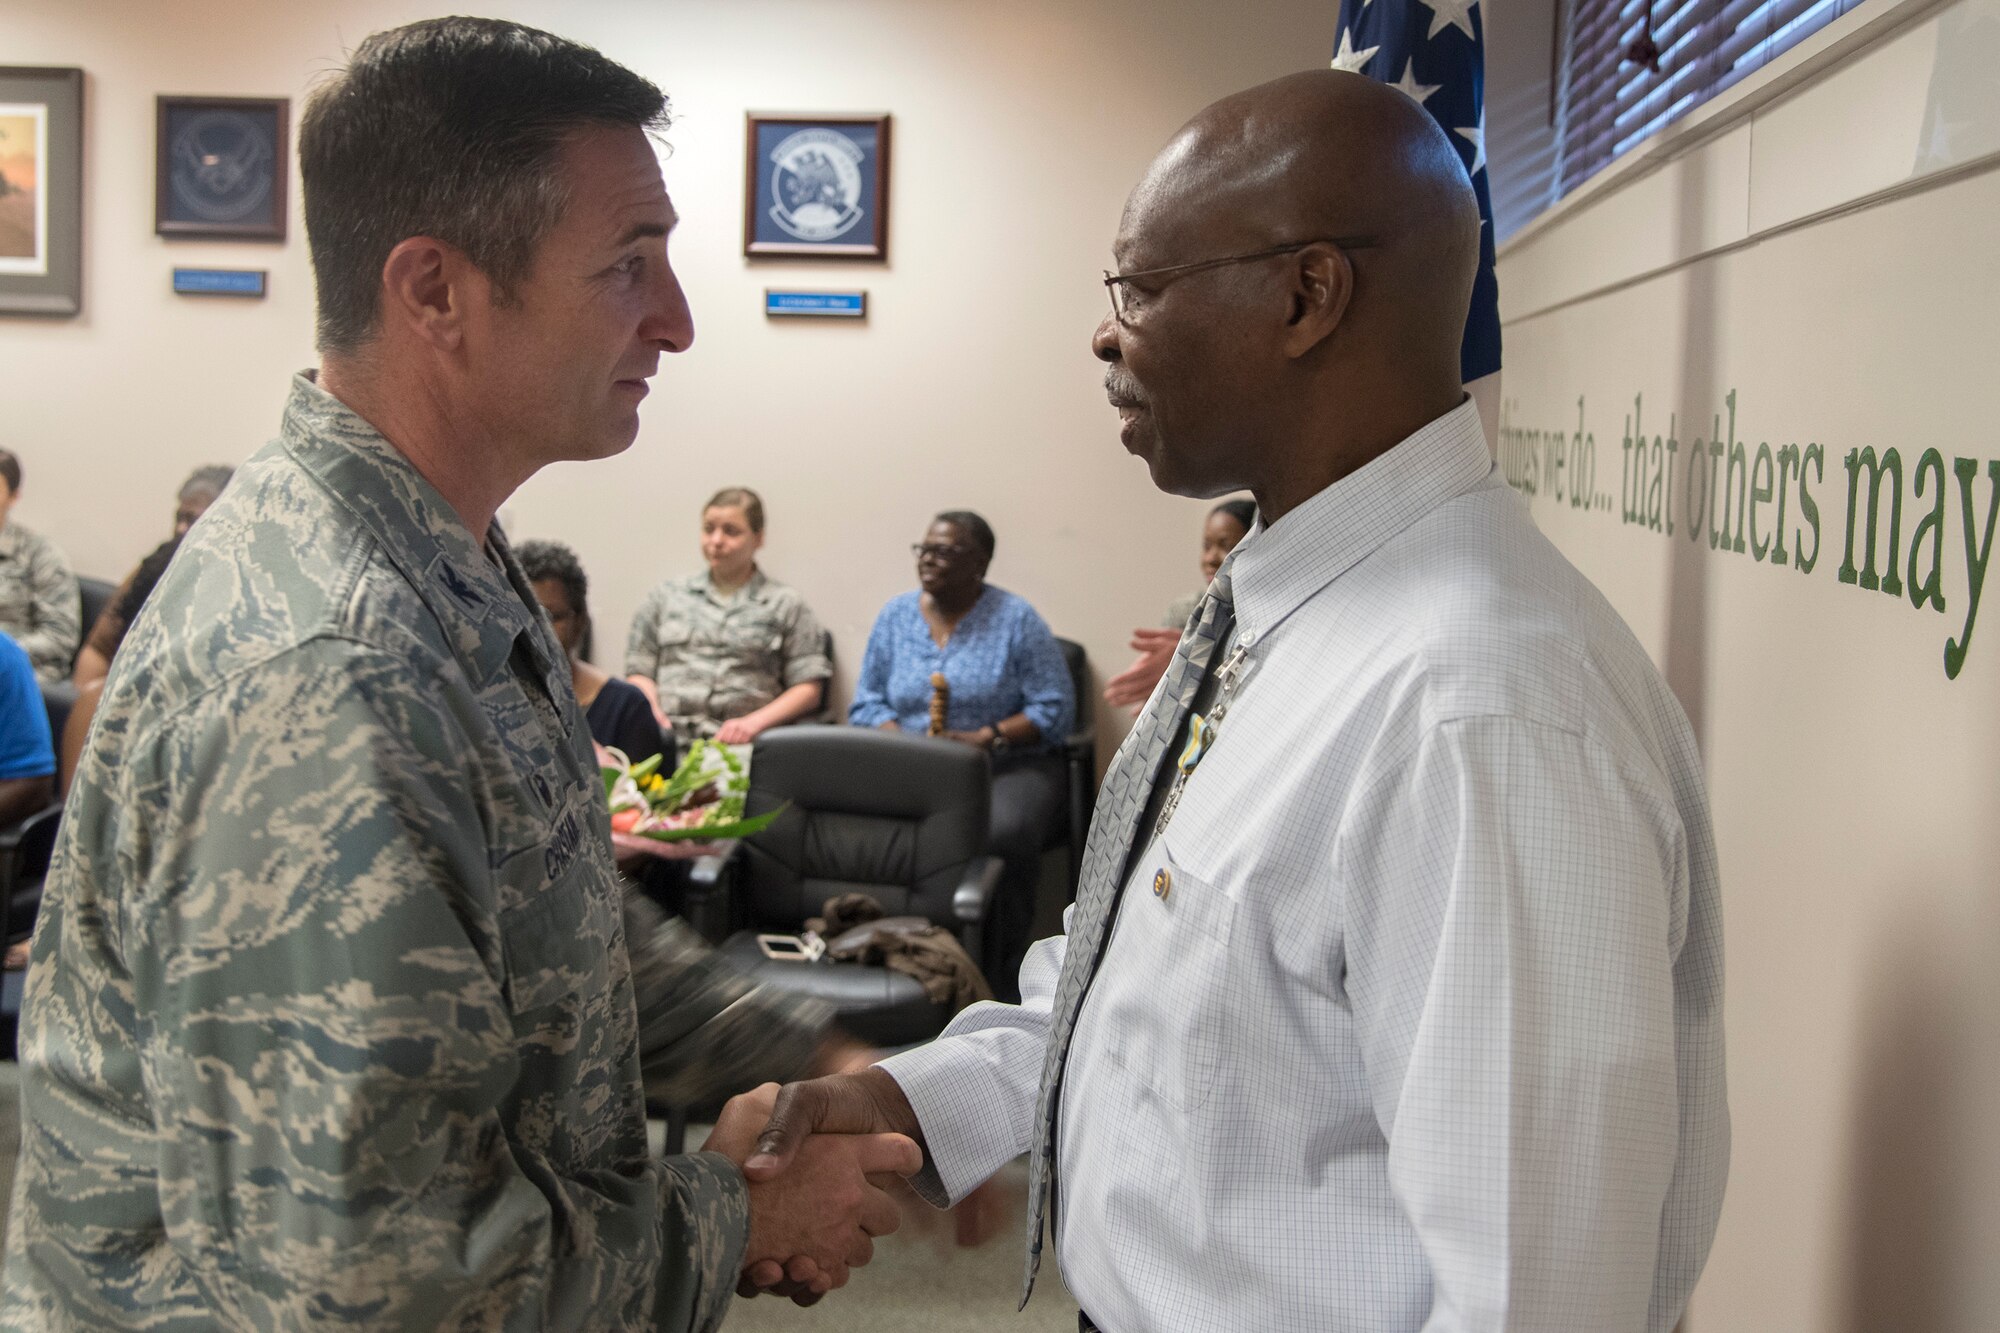 Col. John Chastain, left, 23d Maintenance Group (MXG) commander, shakes hands with Arlonzo Nelson, 23d MXG computer assistant during a retirement ceremony, March 29, 2018, at Moody Air Force Base, Ga. Nelson is retiring after 30 years of civilian service here. (U.S. Air Force photo by Airman Eugene Oliver)